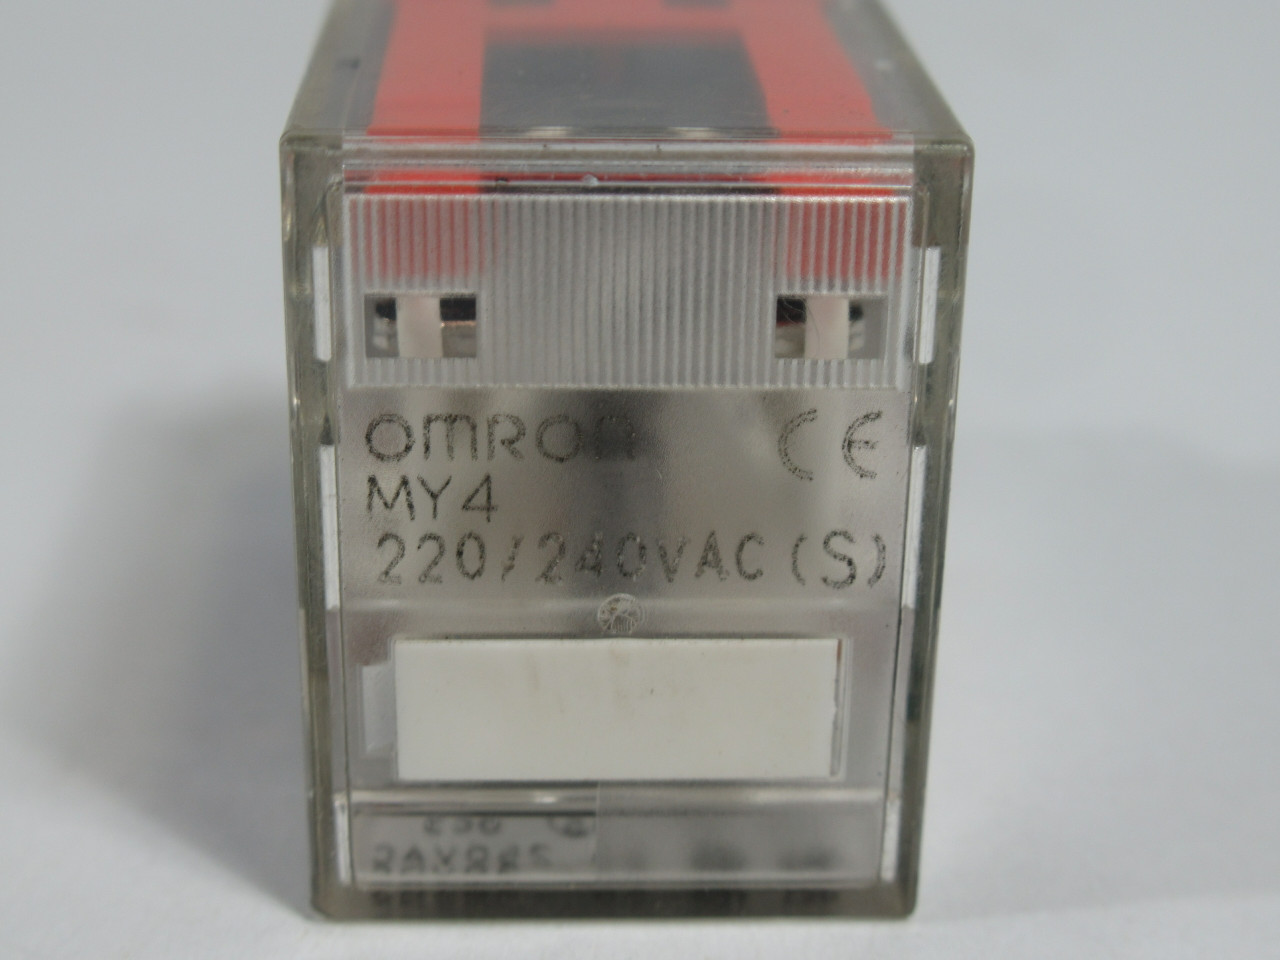 Omron MY4-220/240VAC(S) Relay 220/240VAC Coil 5A 14-Pin USED